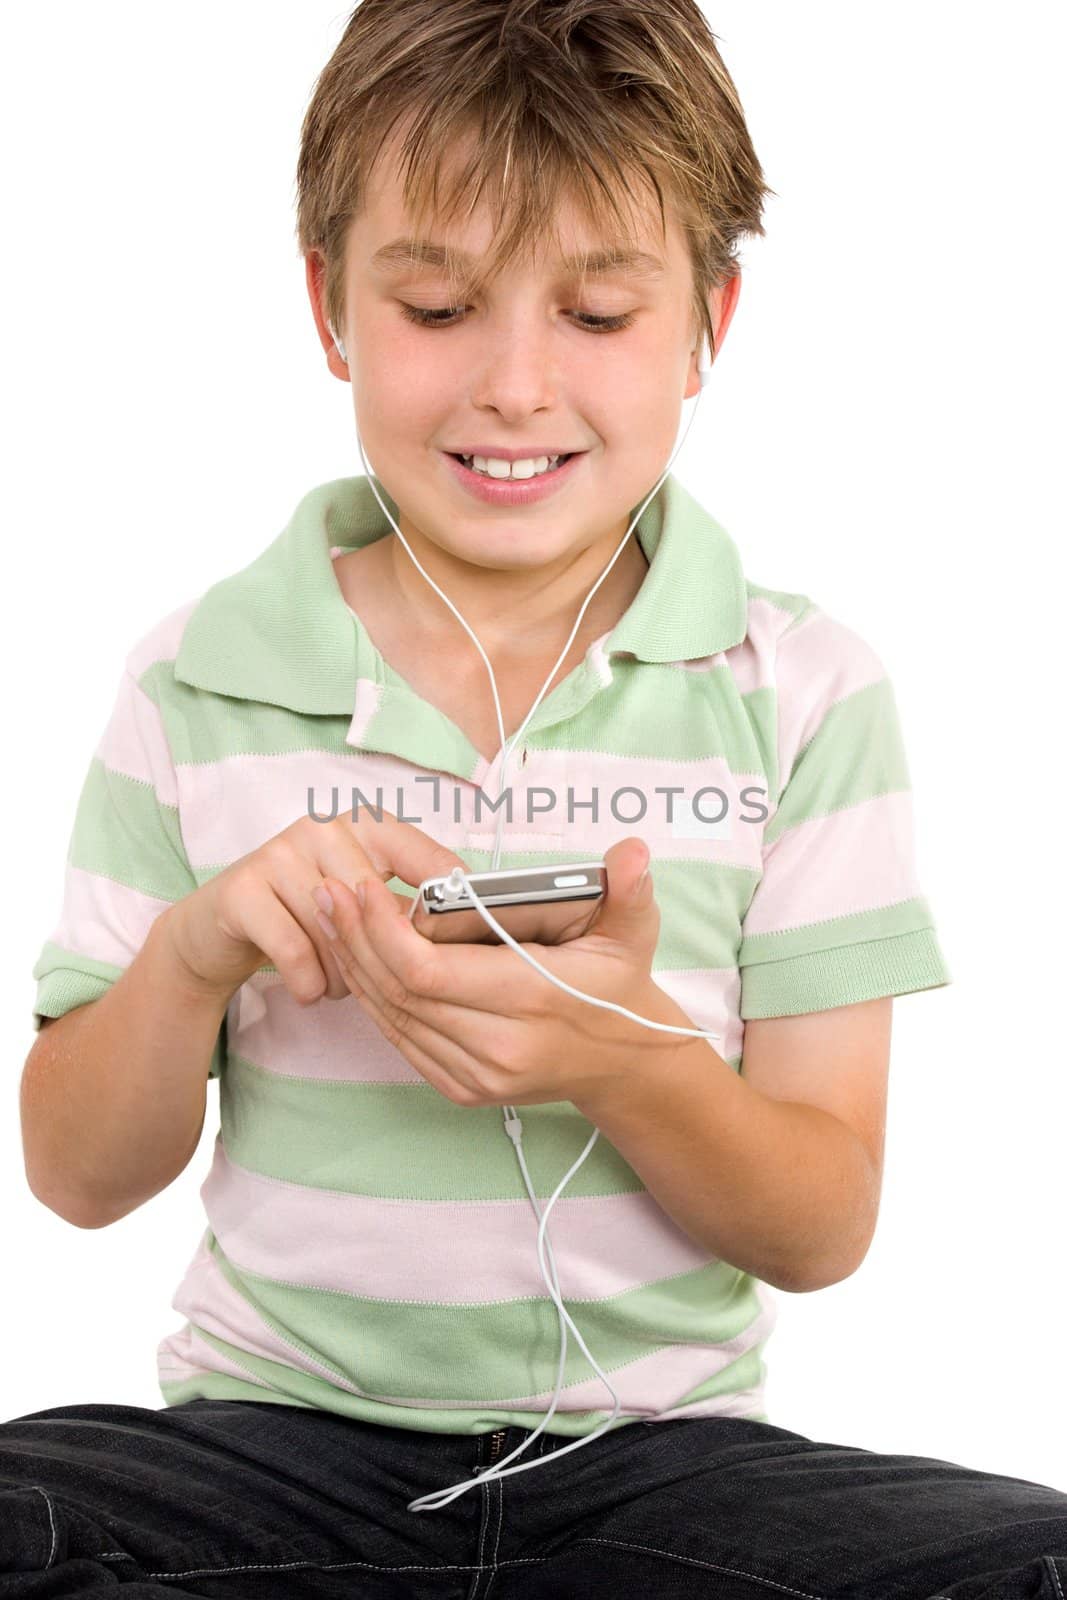 Child sitting down using a digital player.  He is wearing a striped polo shirt and jeans.